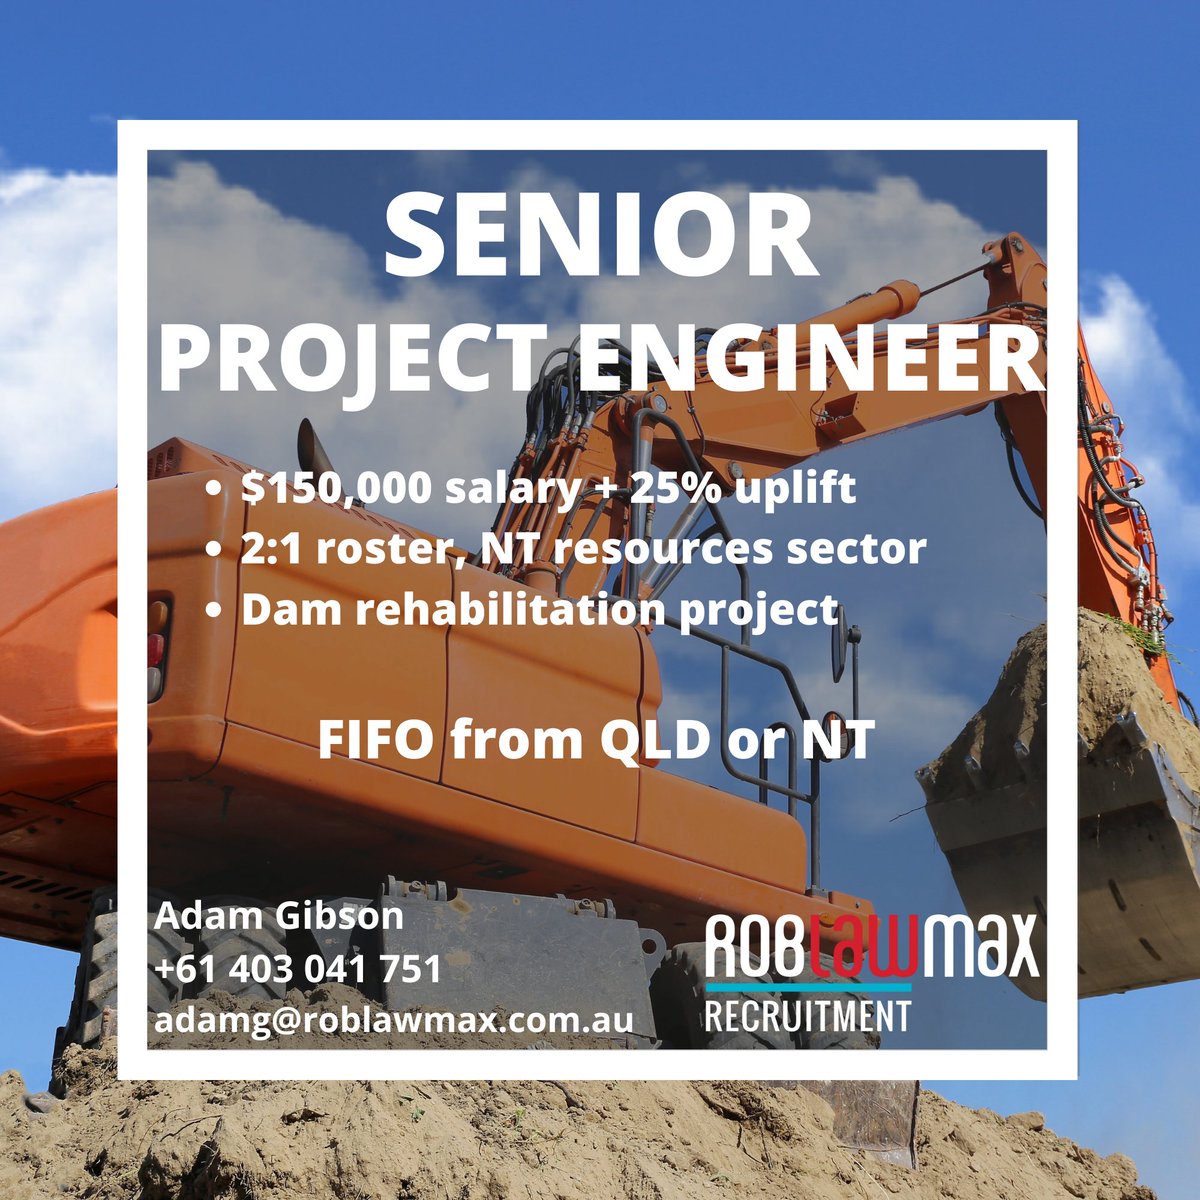 RobLawMax is seeking a Senior Project Engineer for an evaporation pond project for a major mine in NT.

For more information about the role, please see our website here: 1l.ink/QWPGXR8 

#roblawmax #projectengineerjobs #recruitment